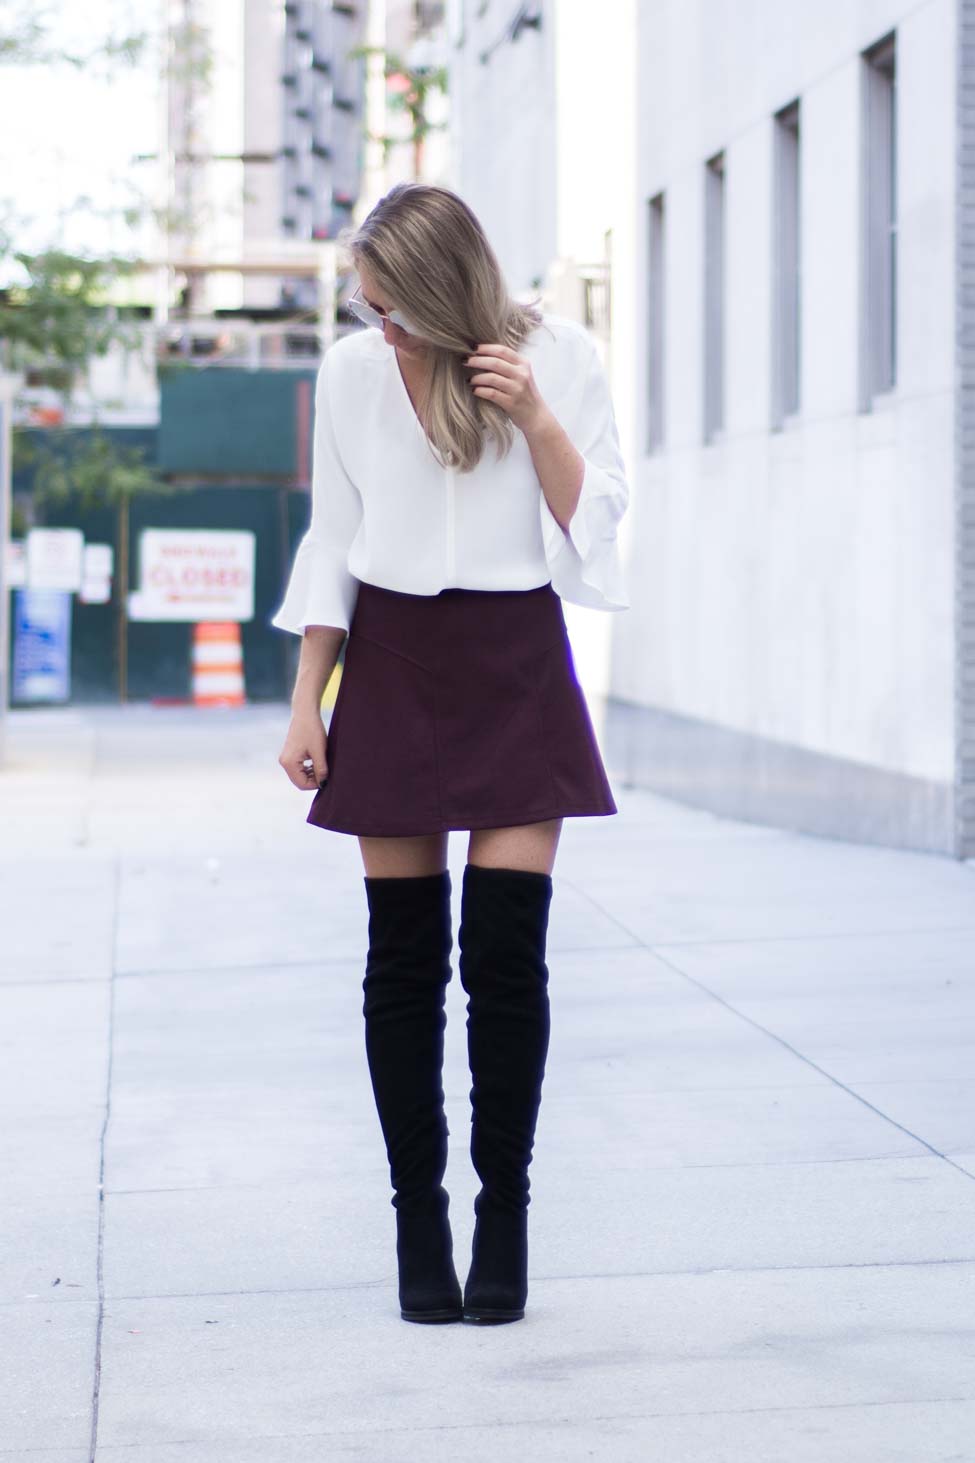 nordstrom tall boots